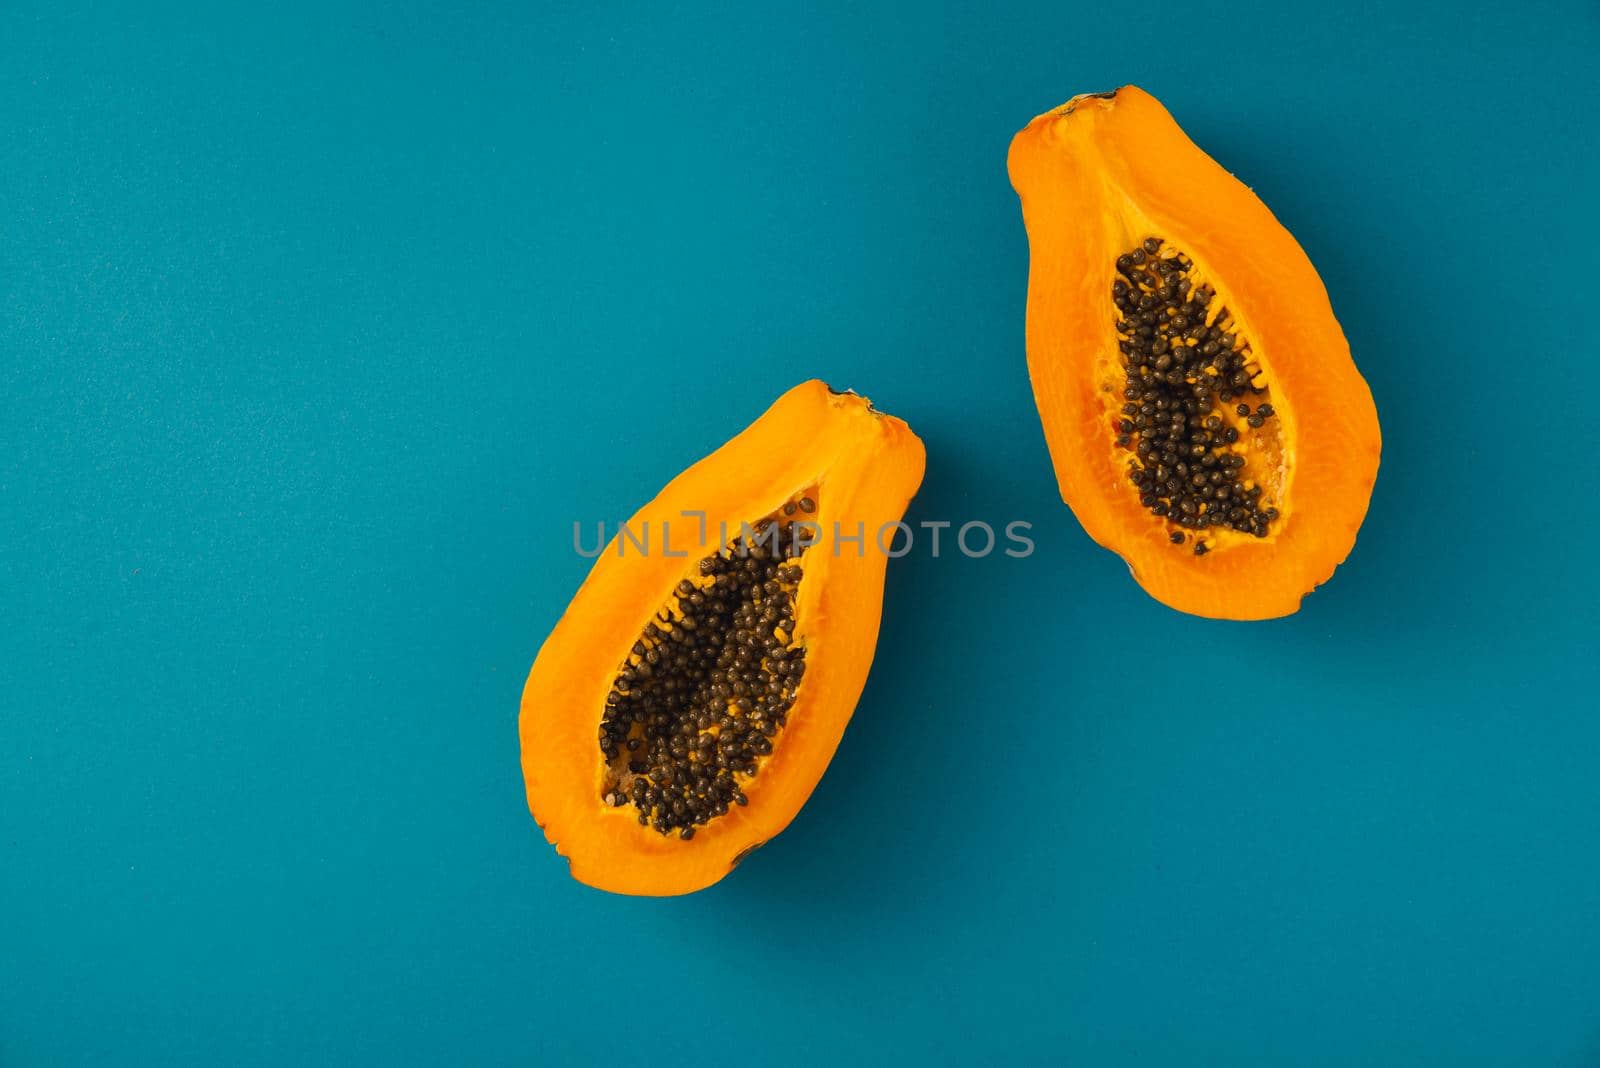 papaya fruit cutted on half on blue background. copy space